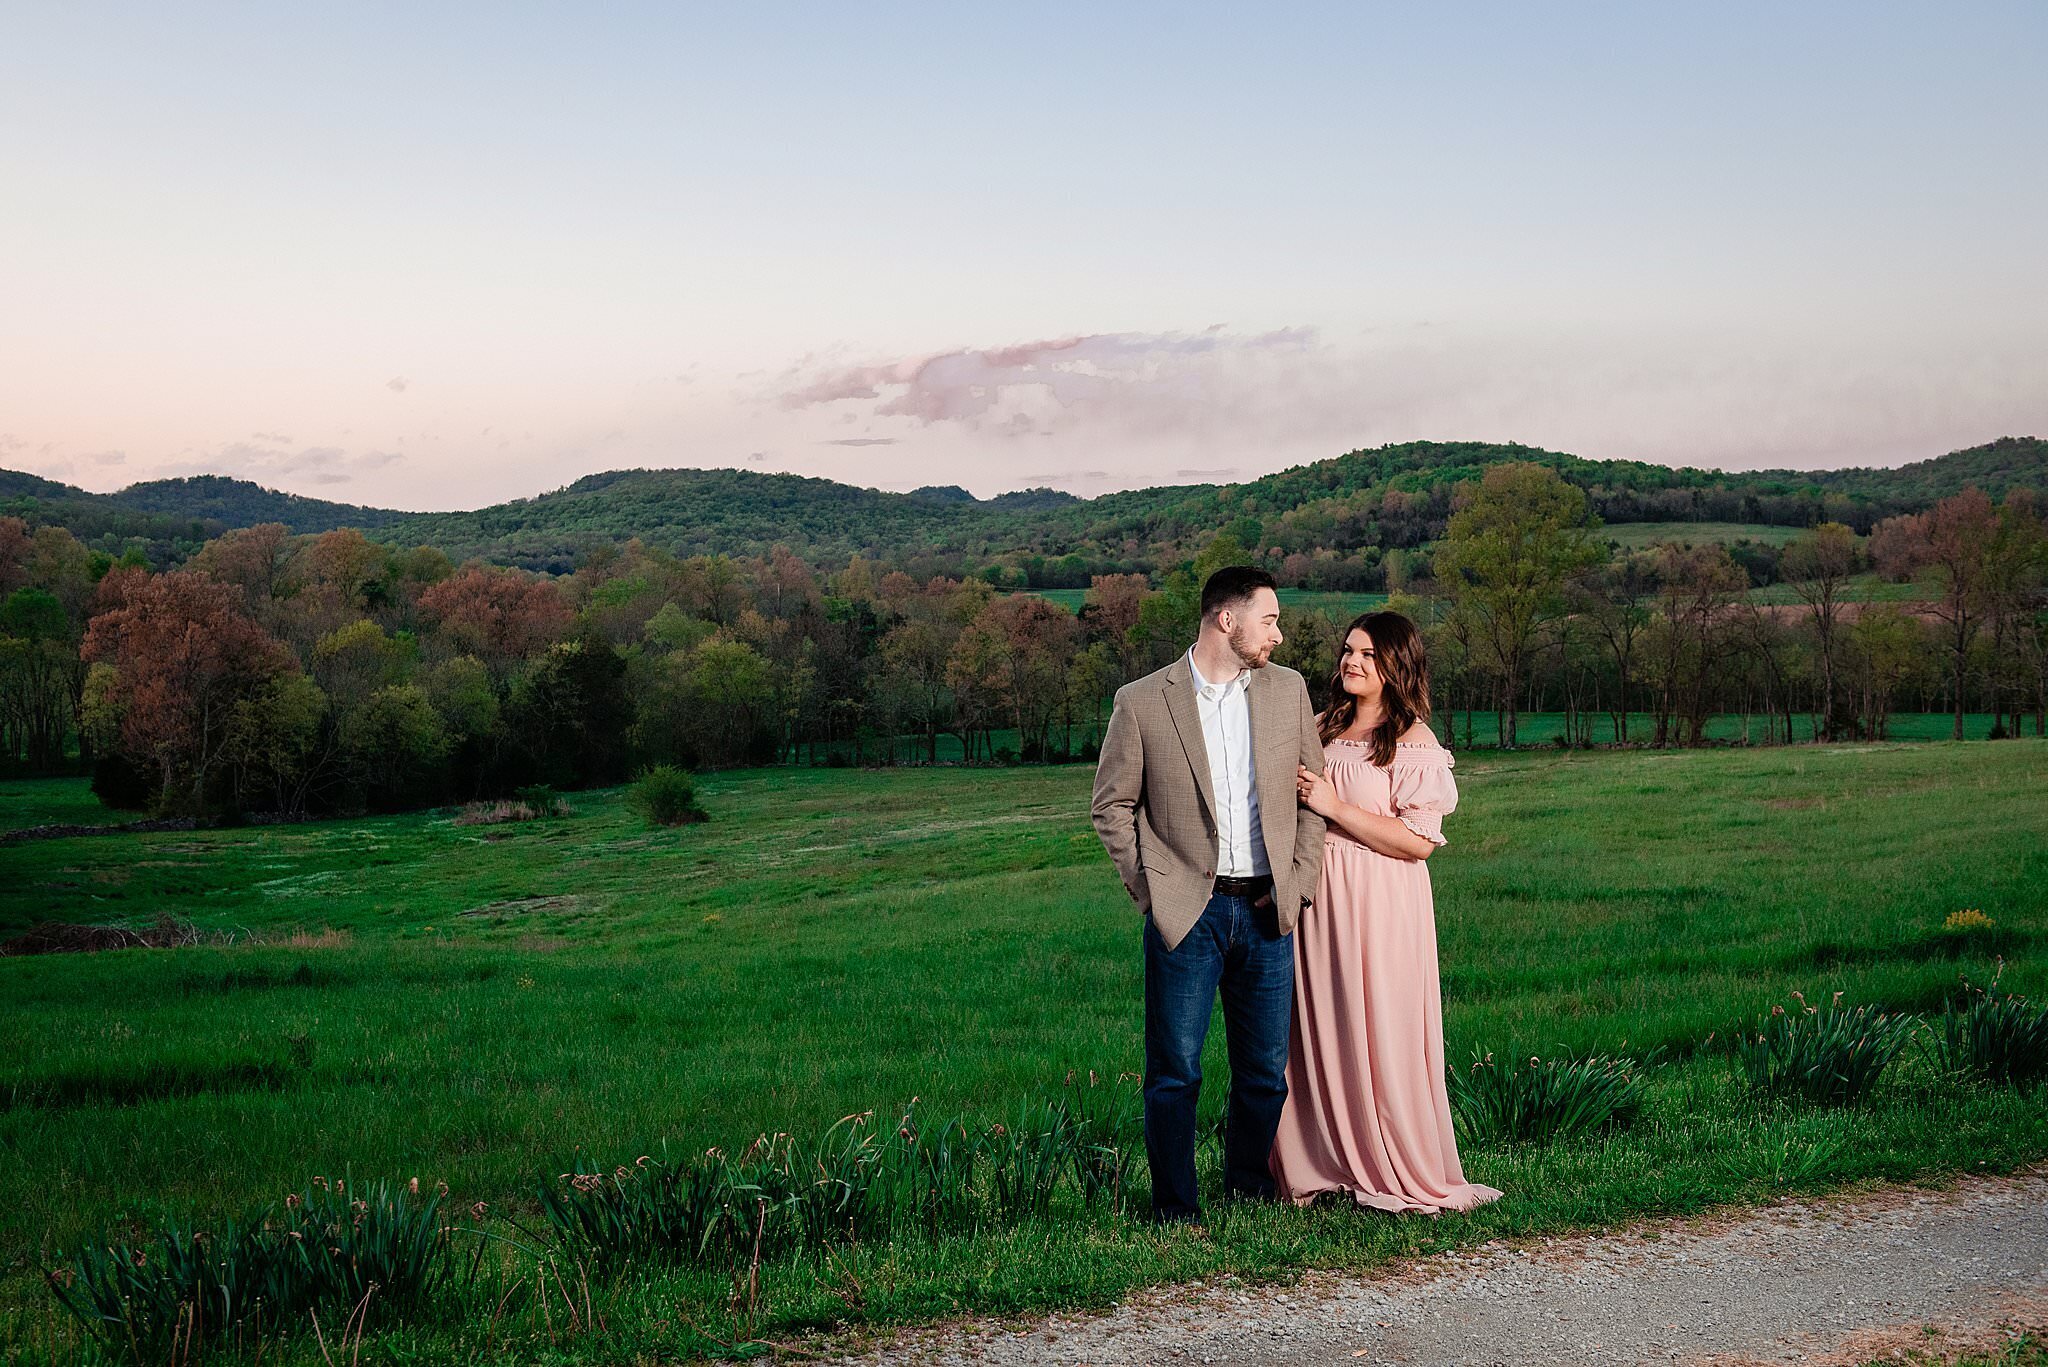 Landscape photo of rolling hills and open green field with engaged couple standing in the forefront